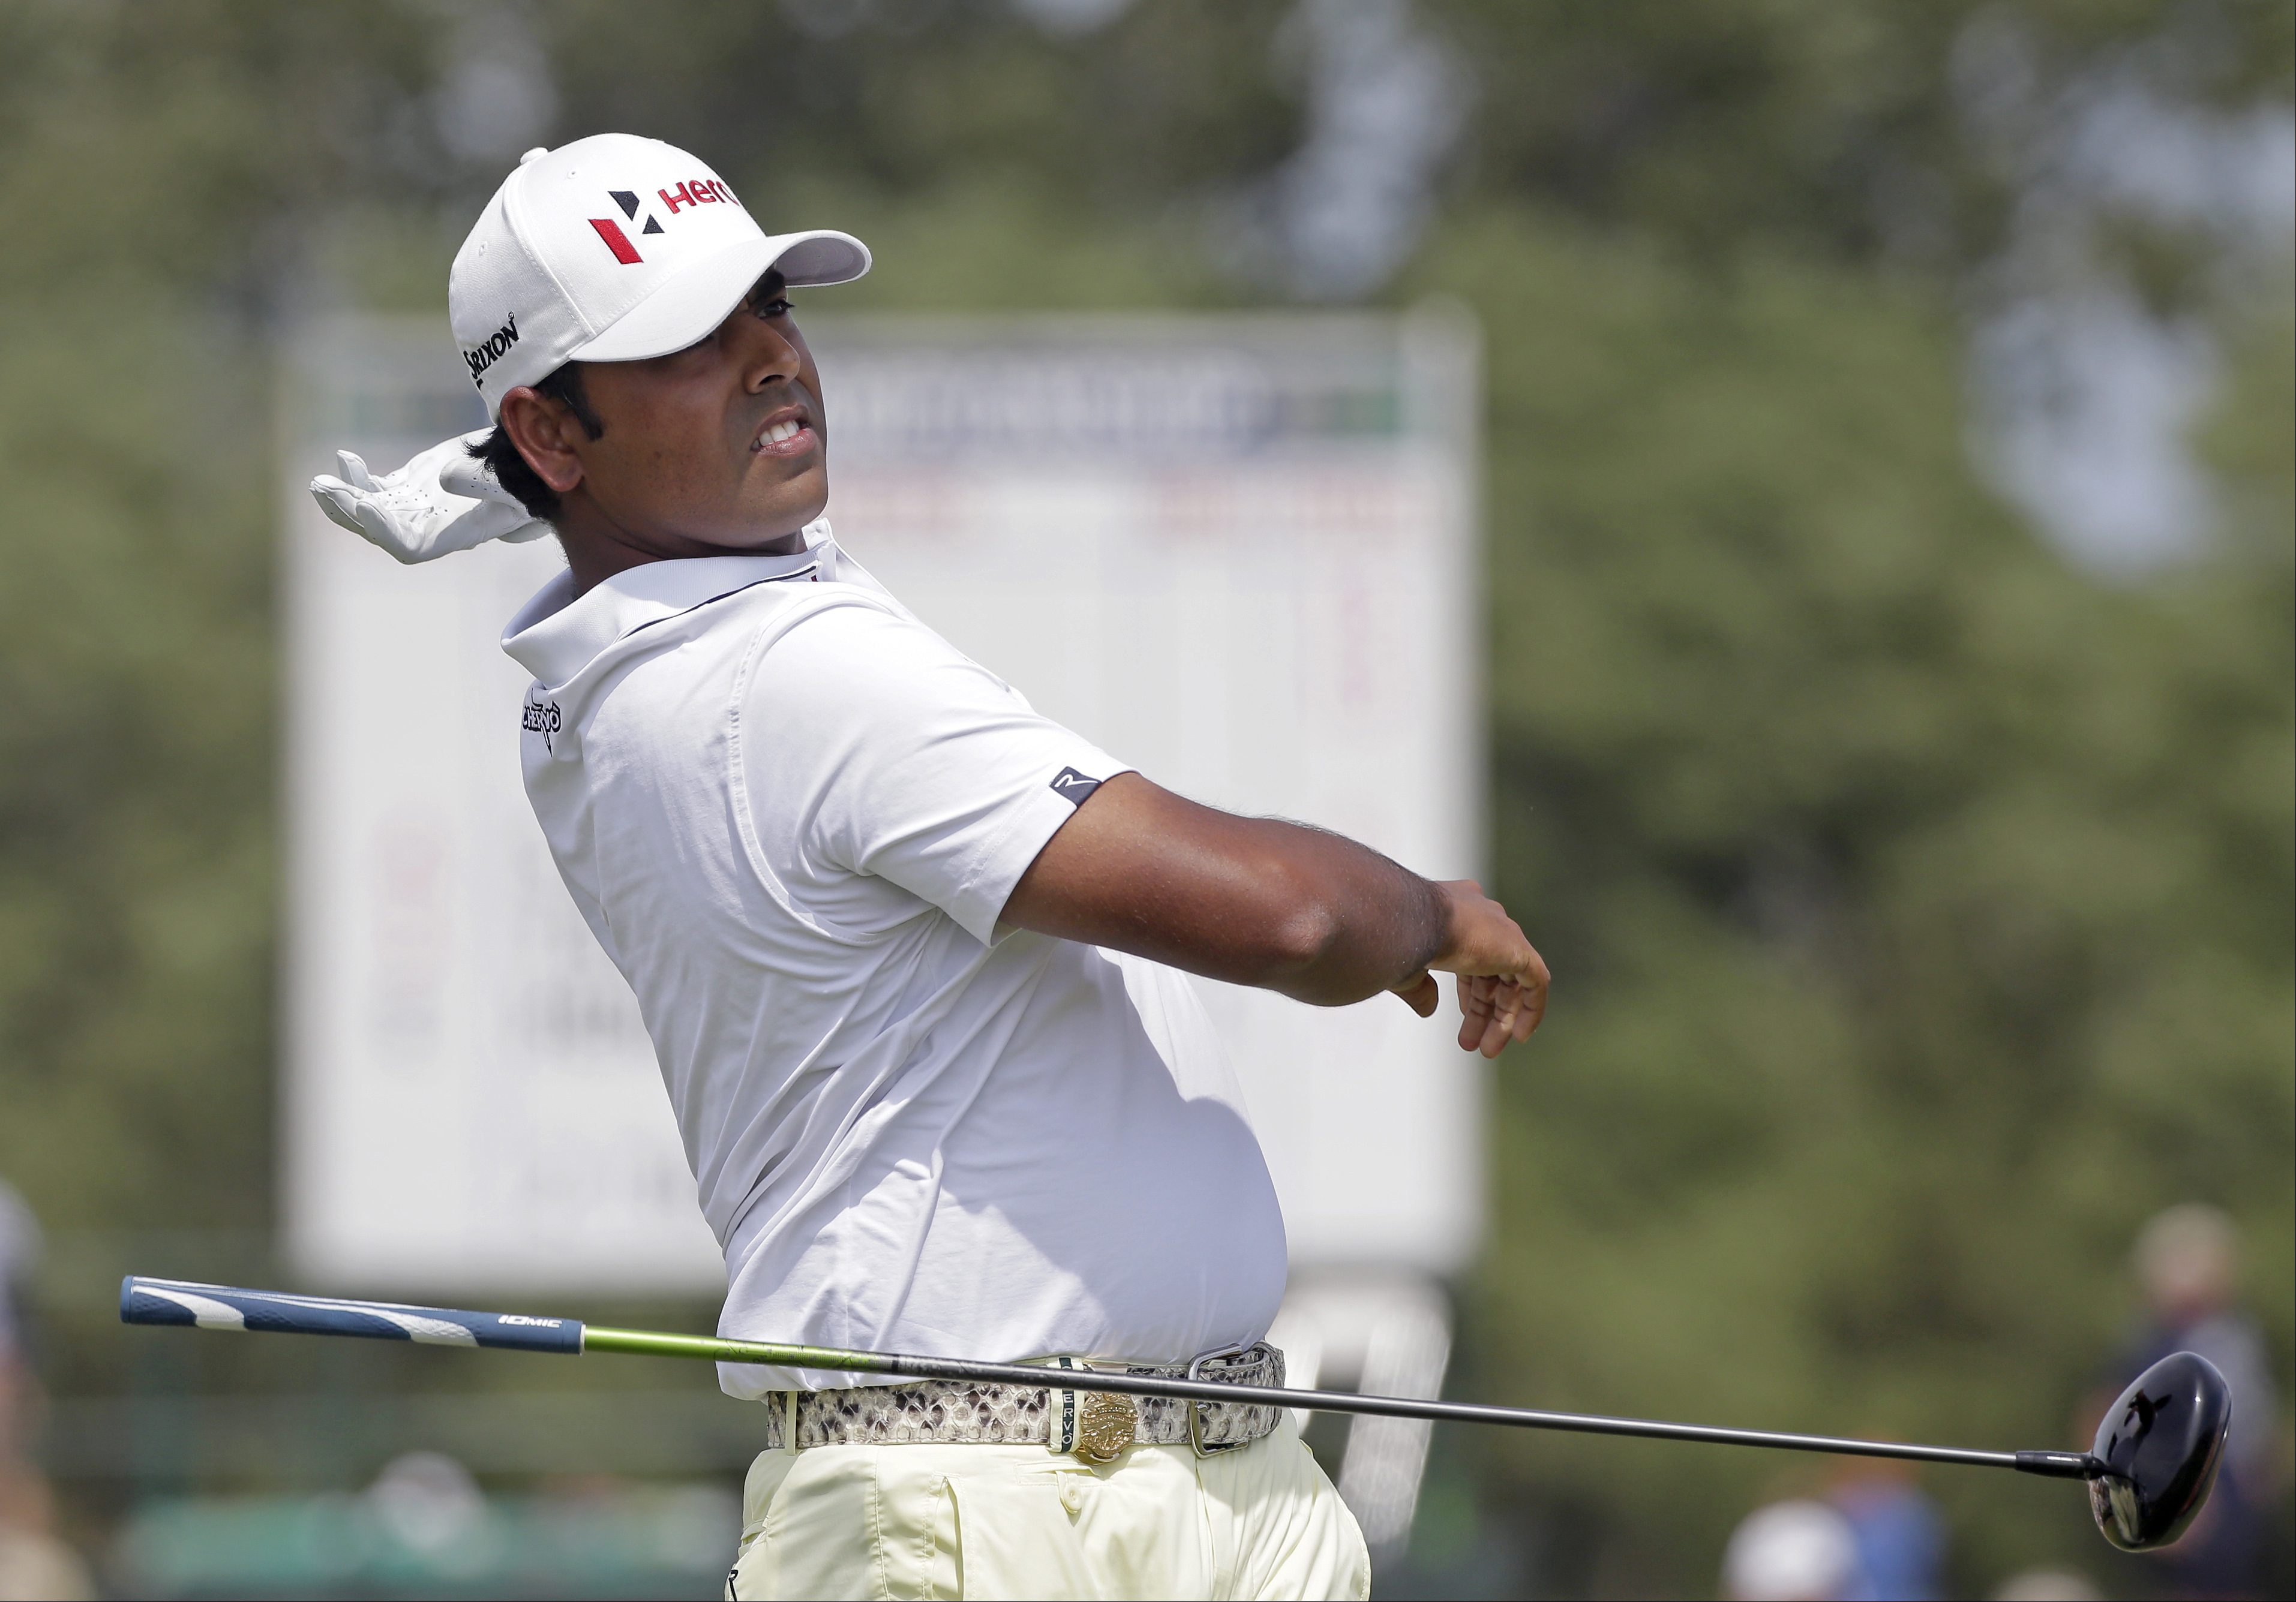 Anirban Lahiri enjoyed the best finish by an Indian despite the occasional errant drive. Photo: AP